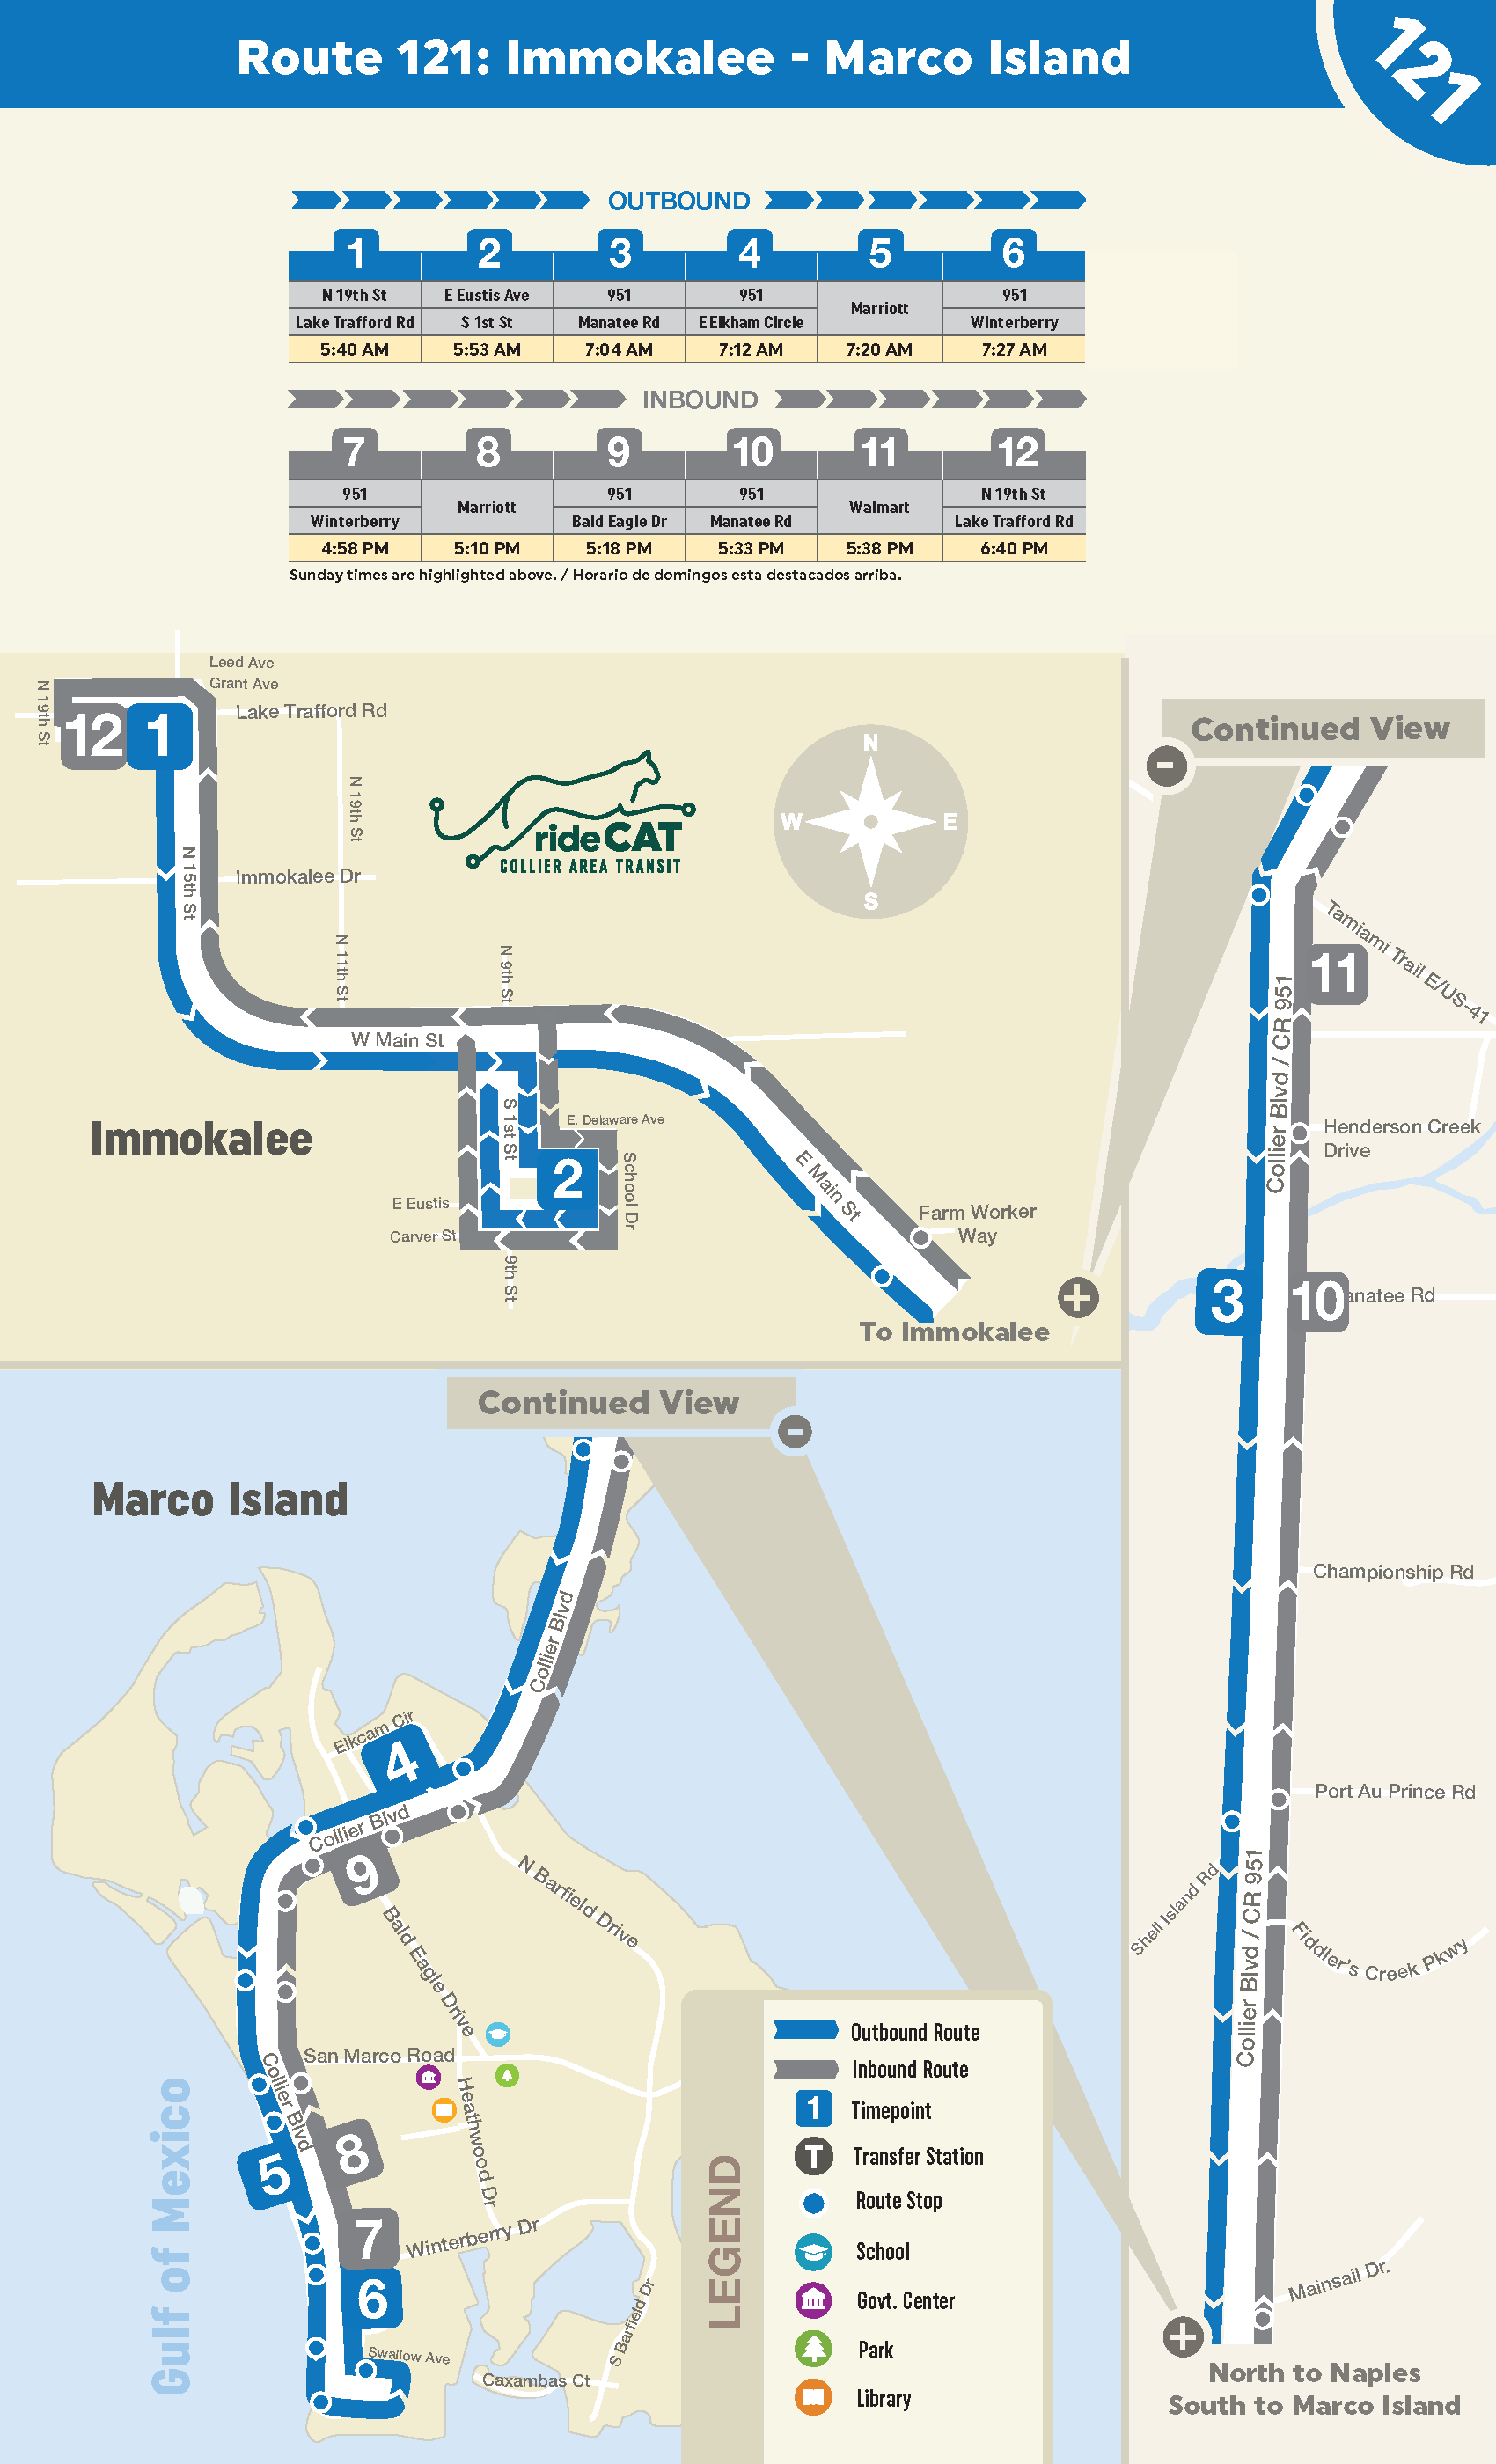 Immokalee to Marco Island Express